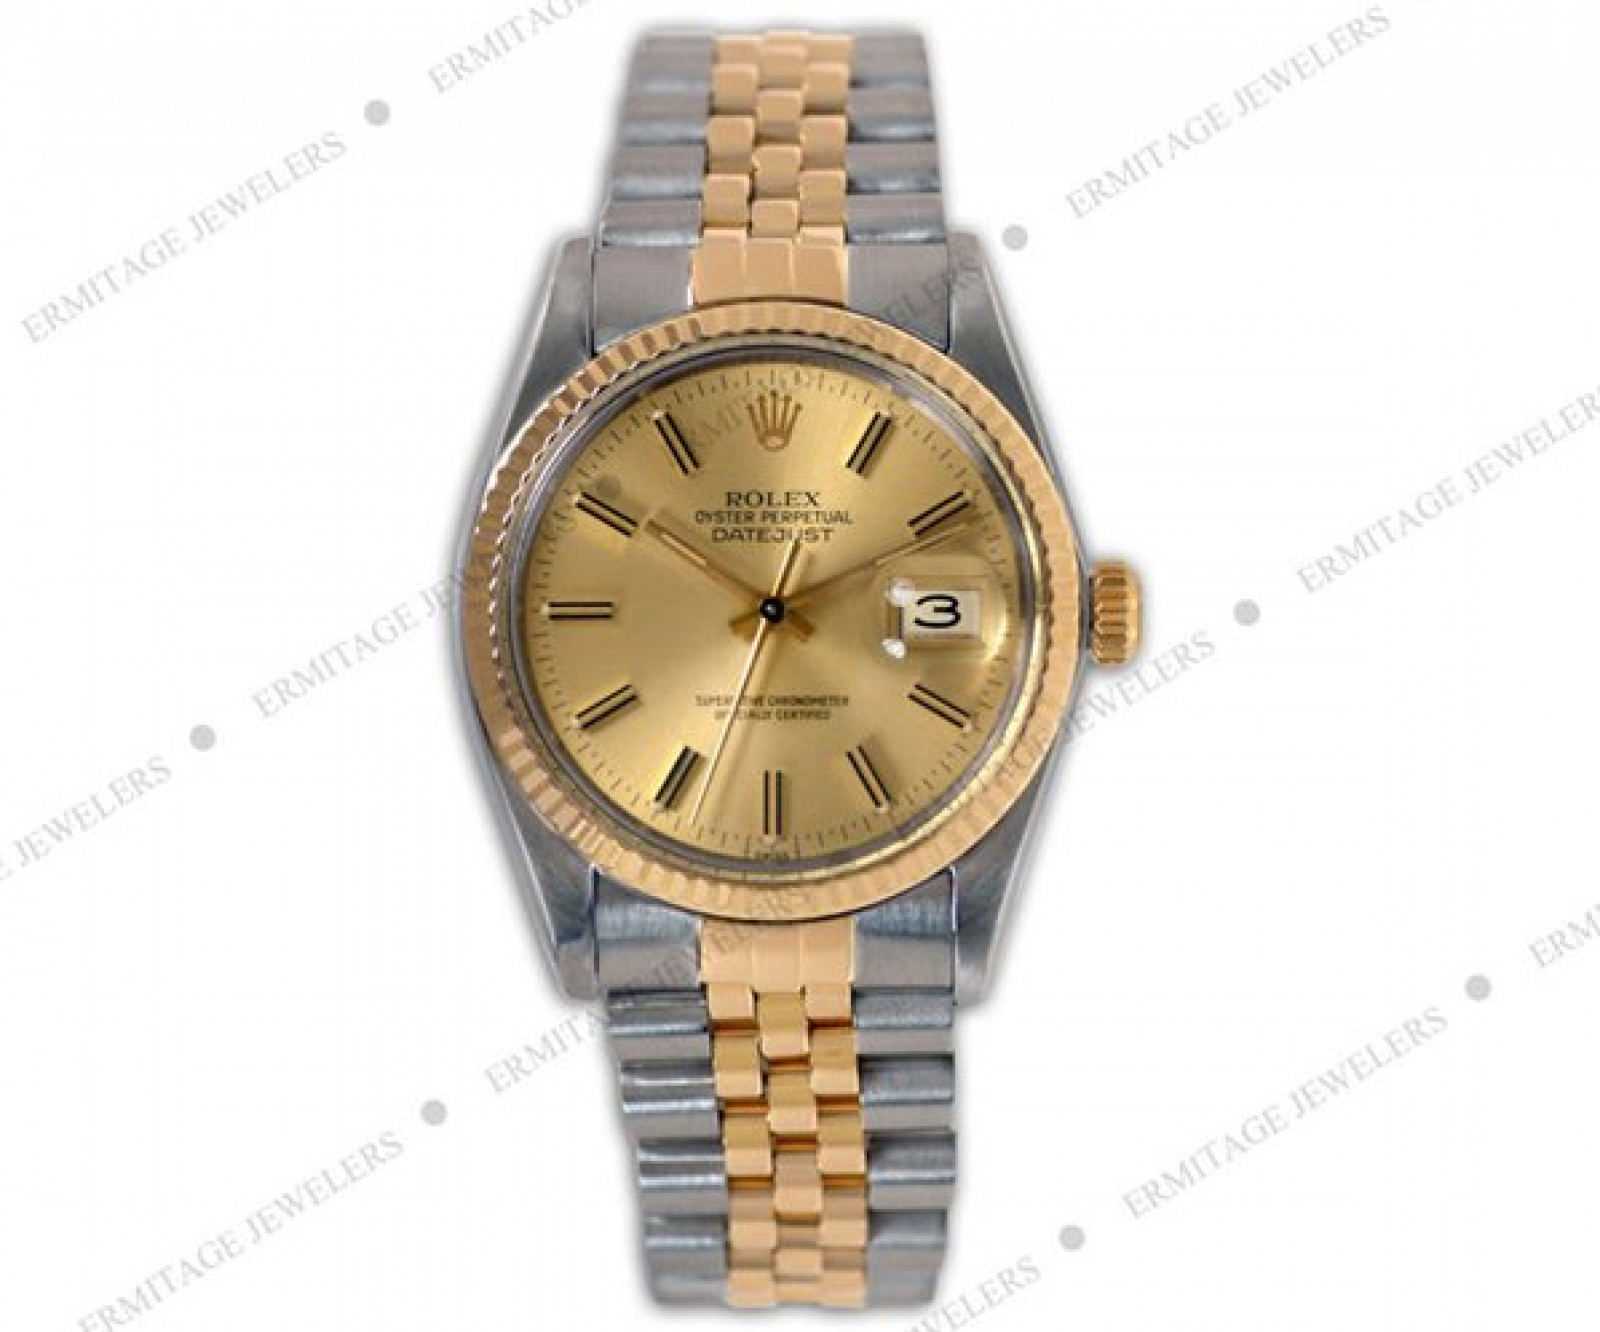 16013 | Ermitage Sell Men\'s Rolex Jewelers Datejust